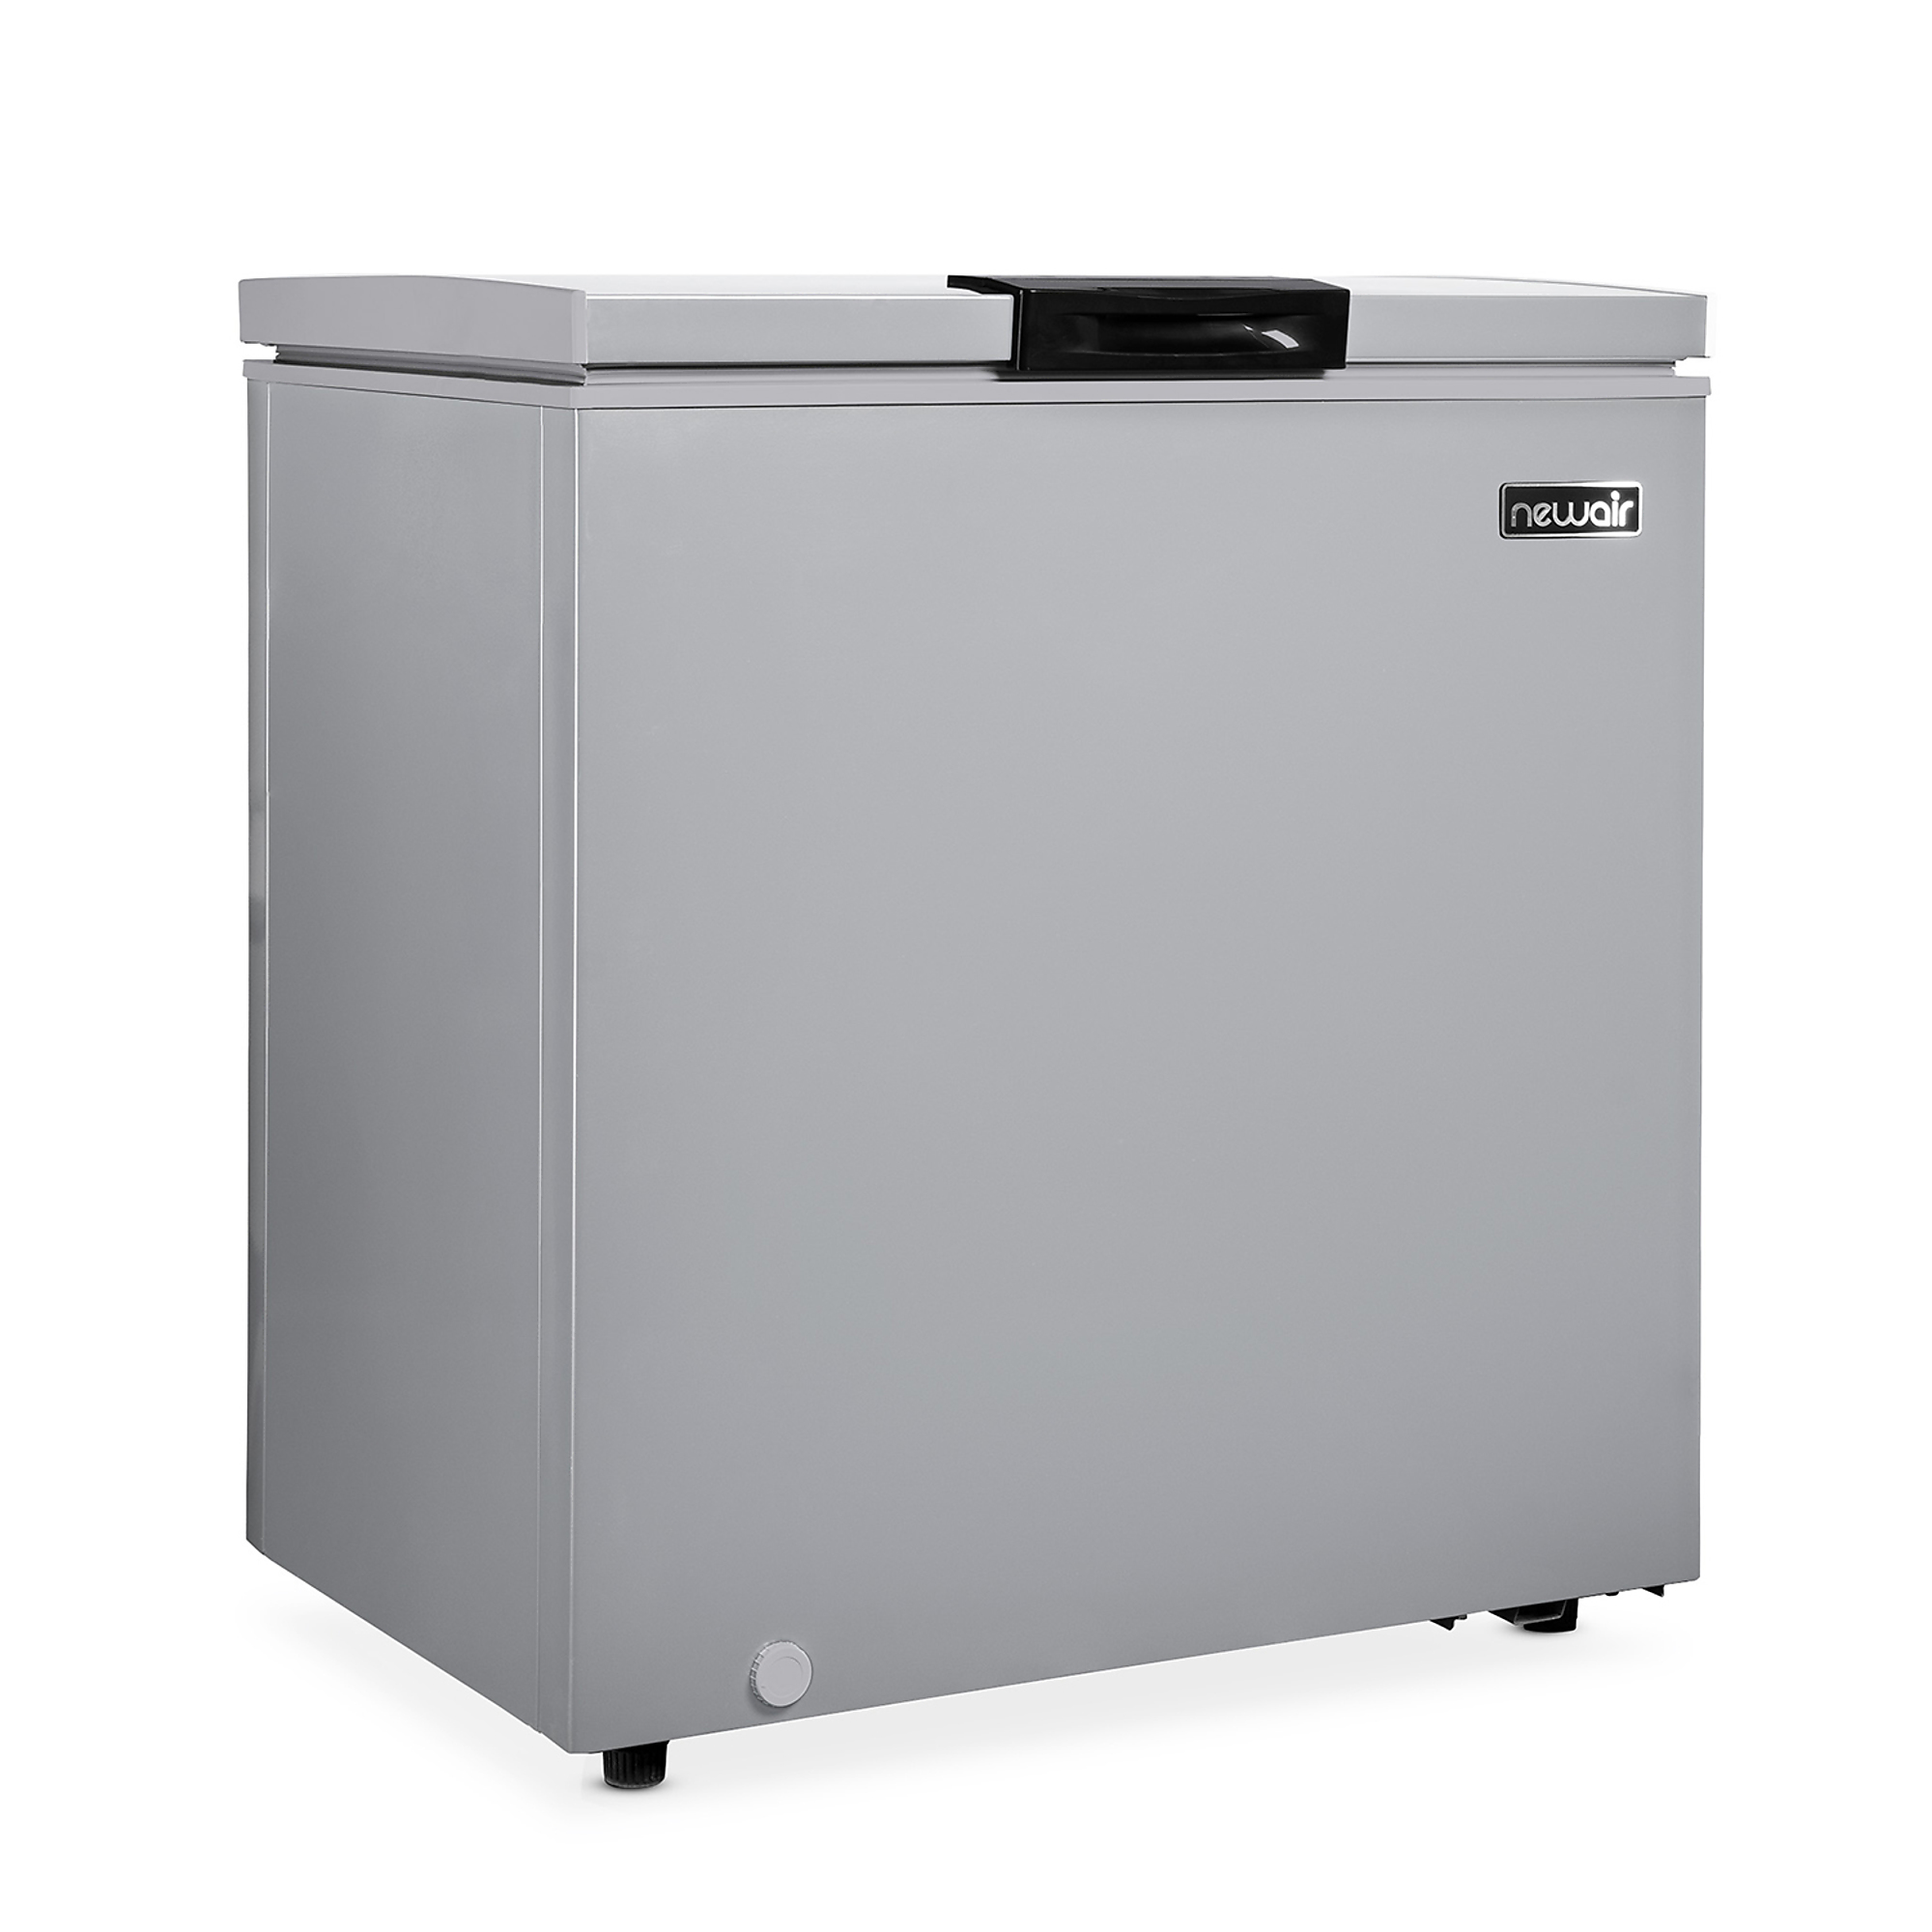 NewAir NFT050GA00 Mini Deep Chest Freezer Review, Discount, + Giveaway -  Thrifty Nifty Mommy